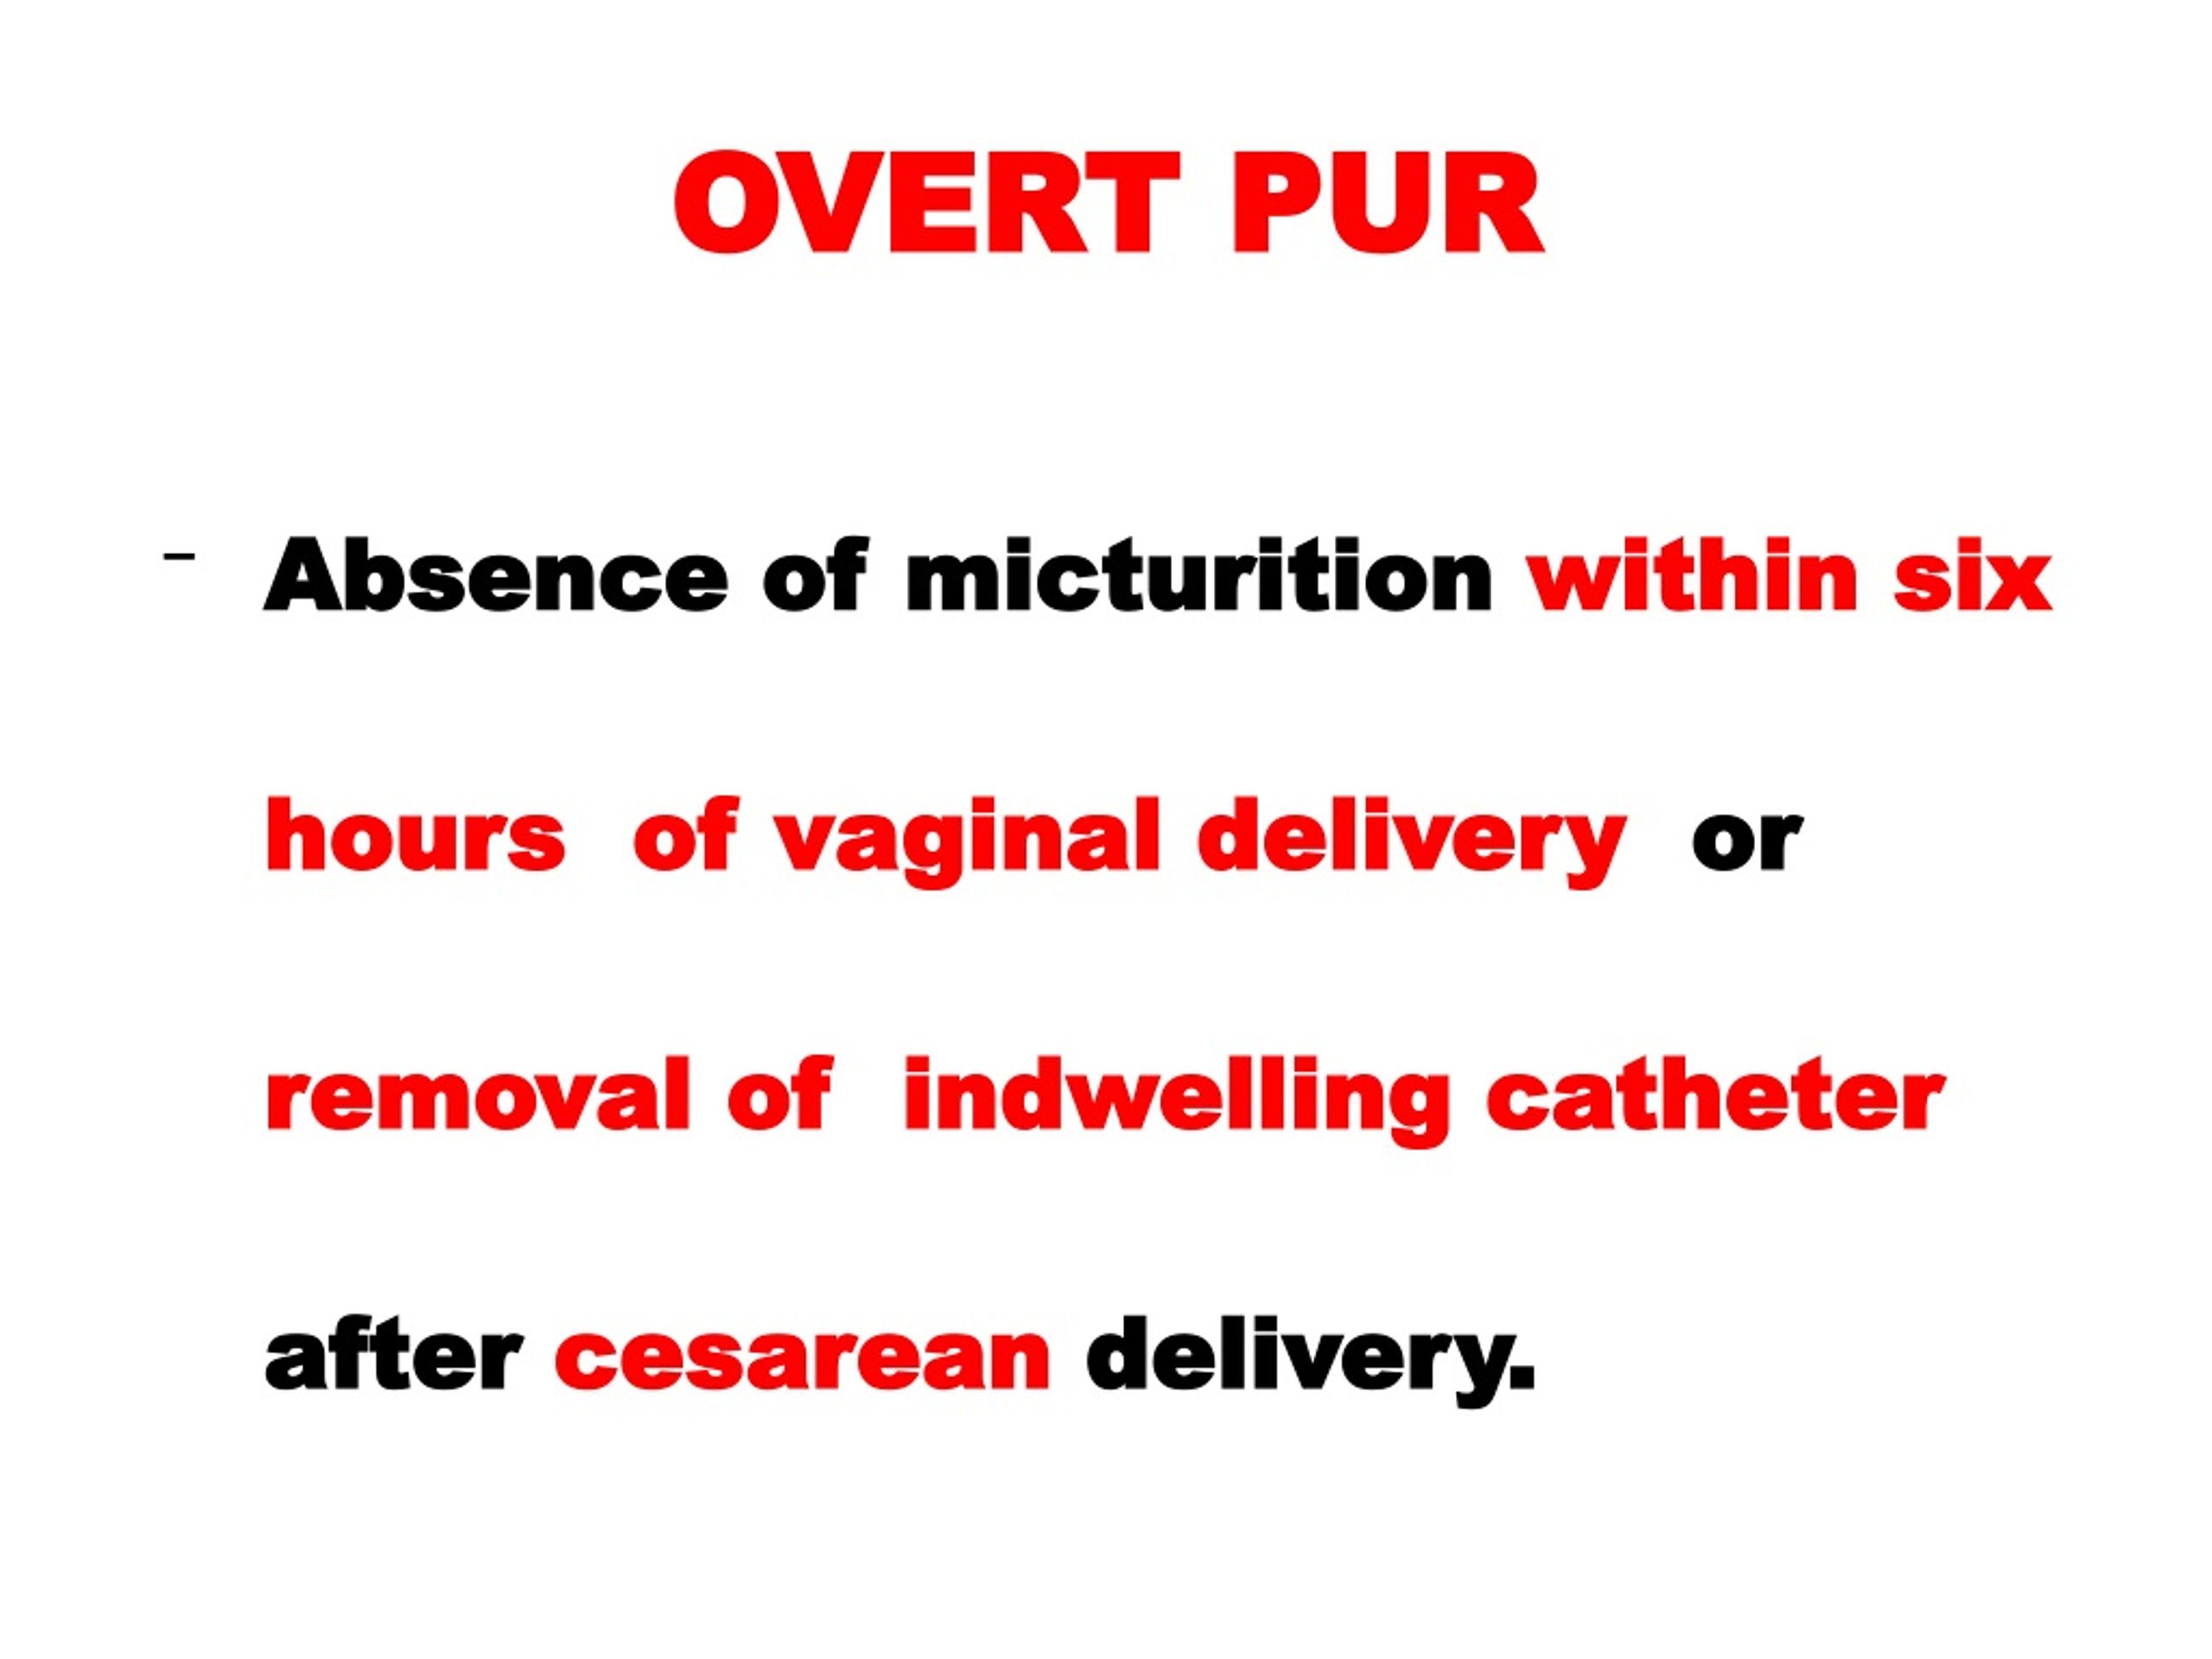 PPT - Postoperative urinary retention PowerPoint Presentation, free  download - ID:282019